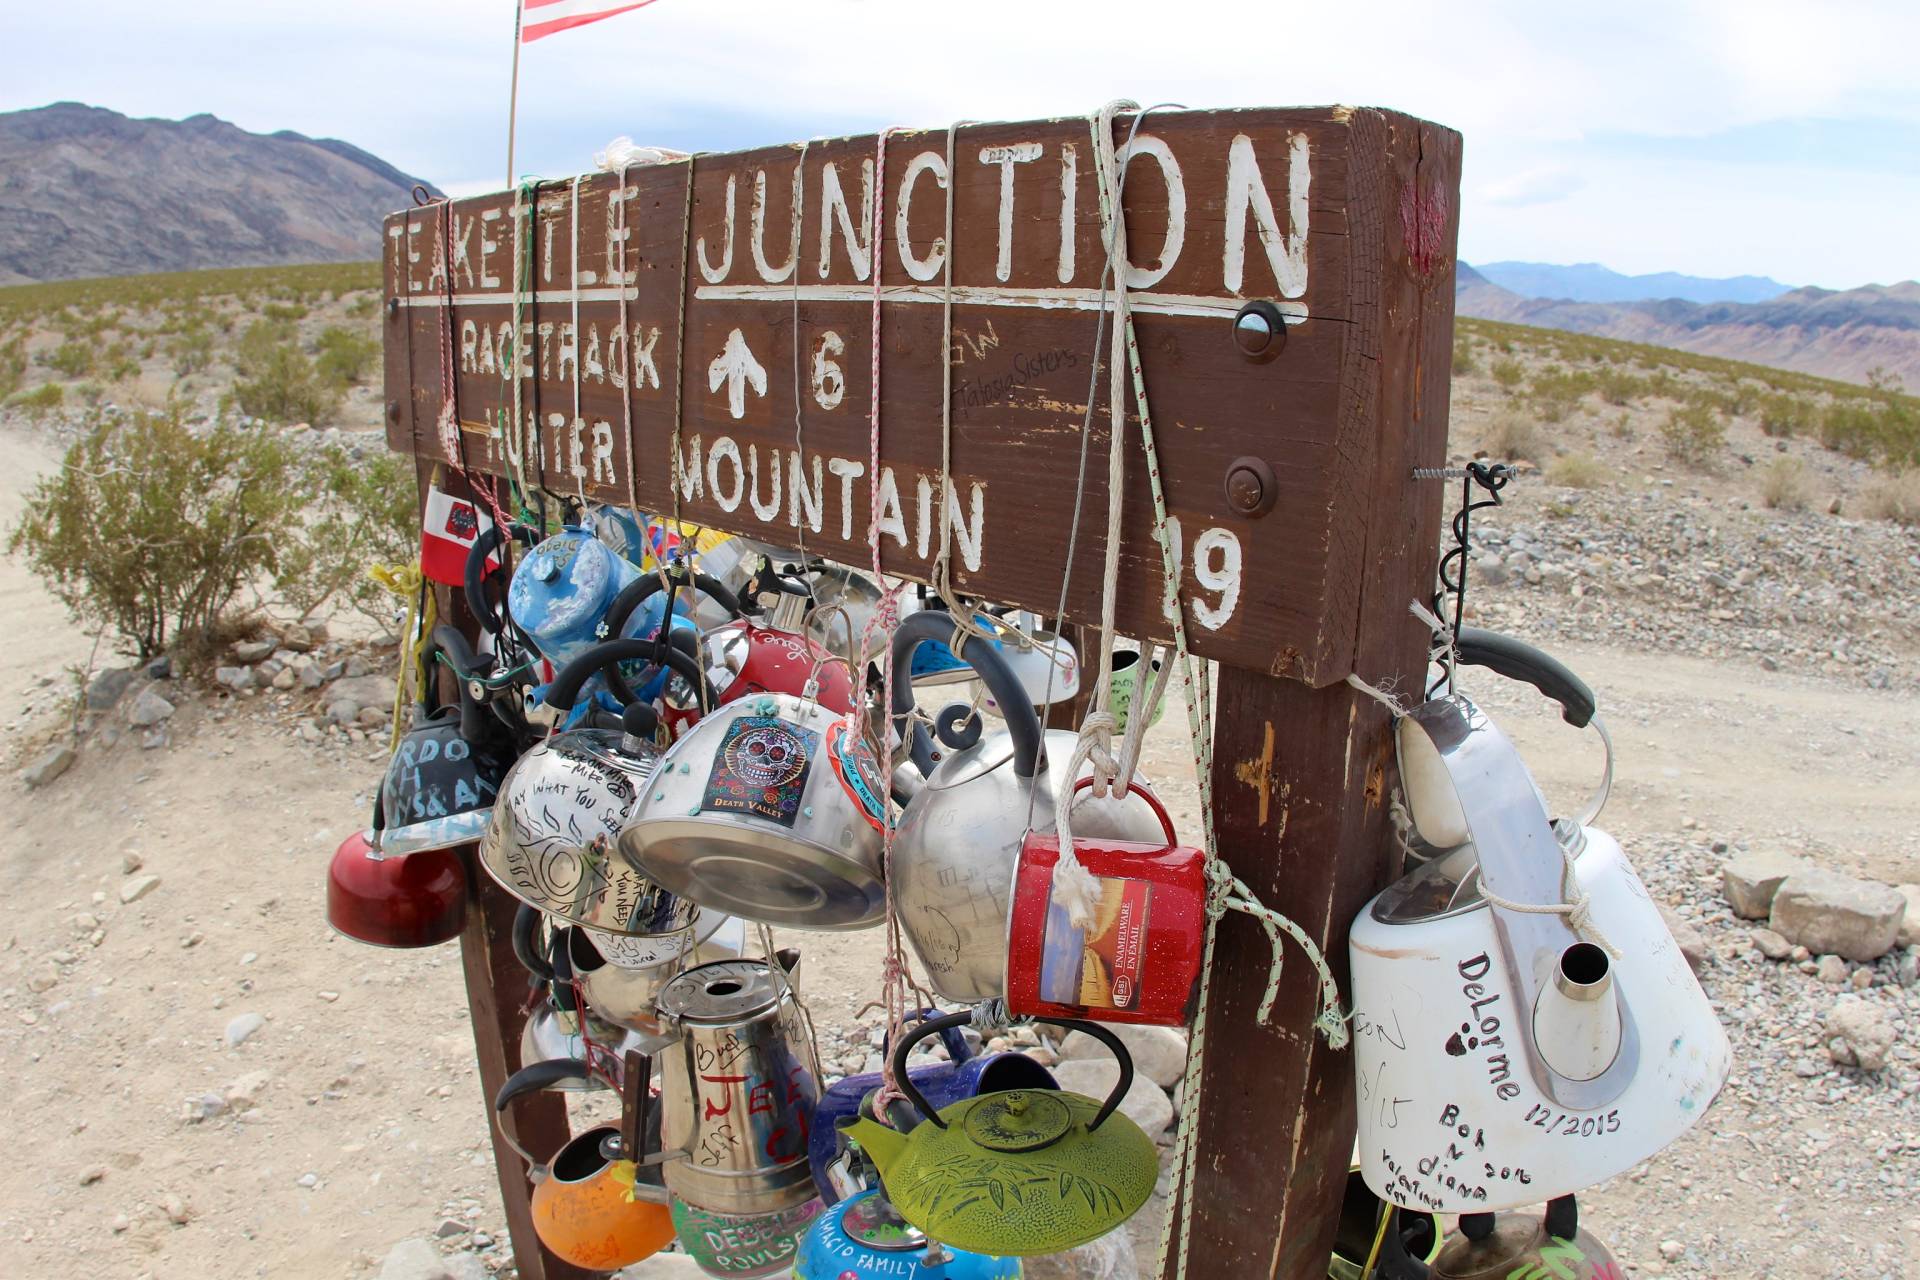 Teakettle Junction on the Racetrack Road, Death Valley National Park, California